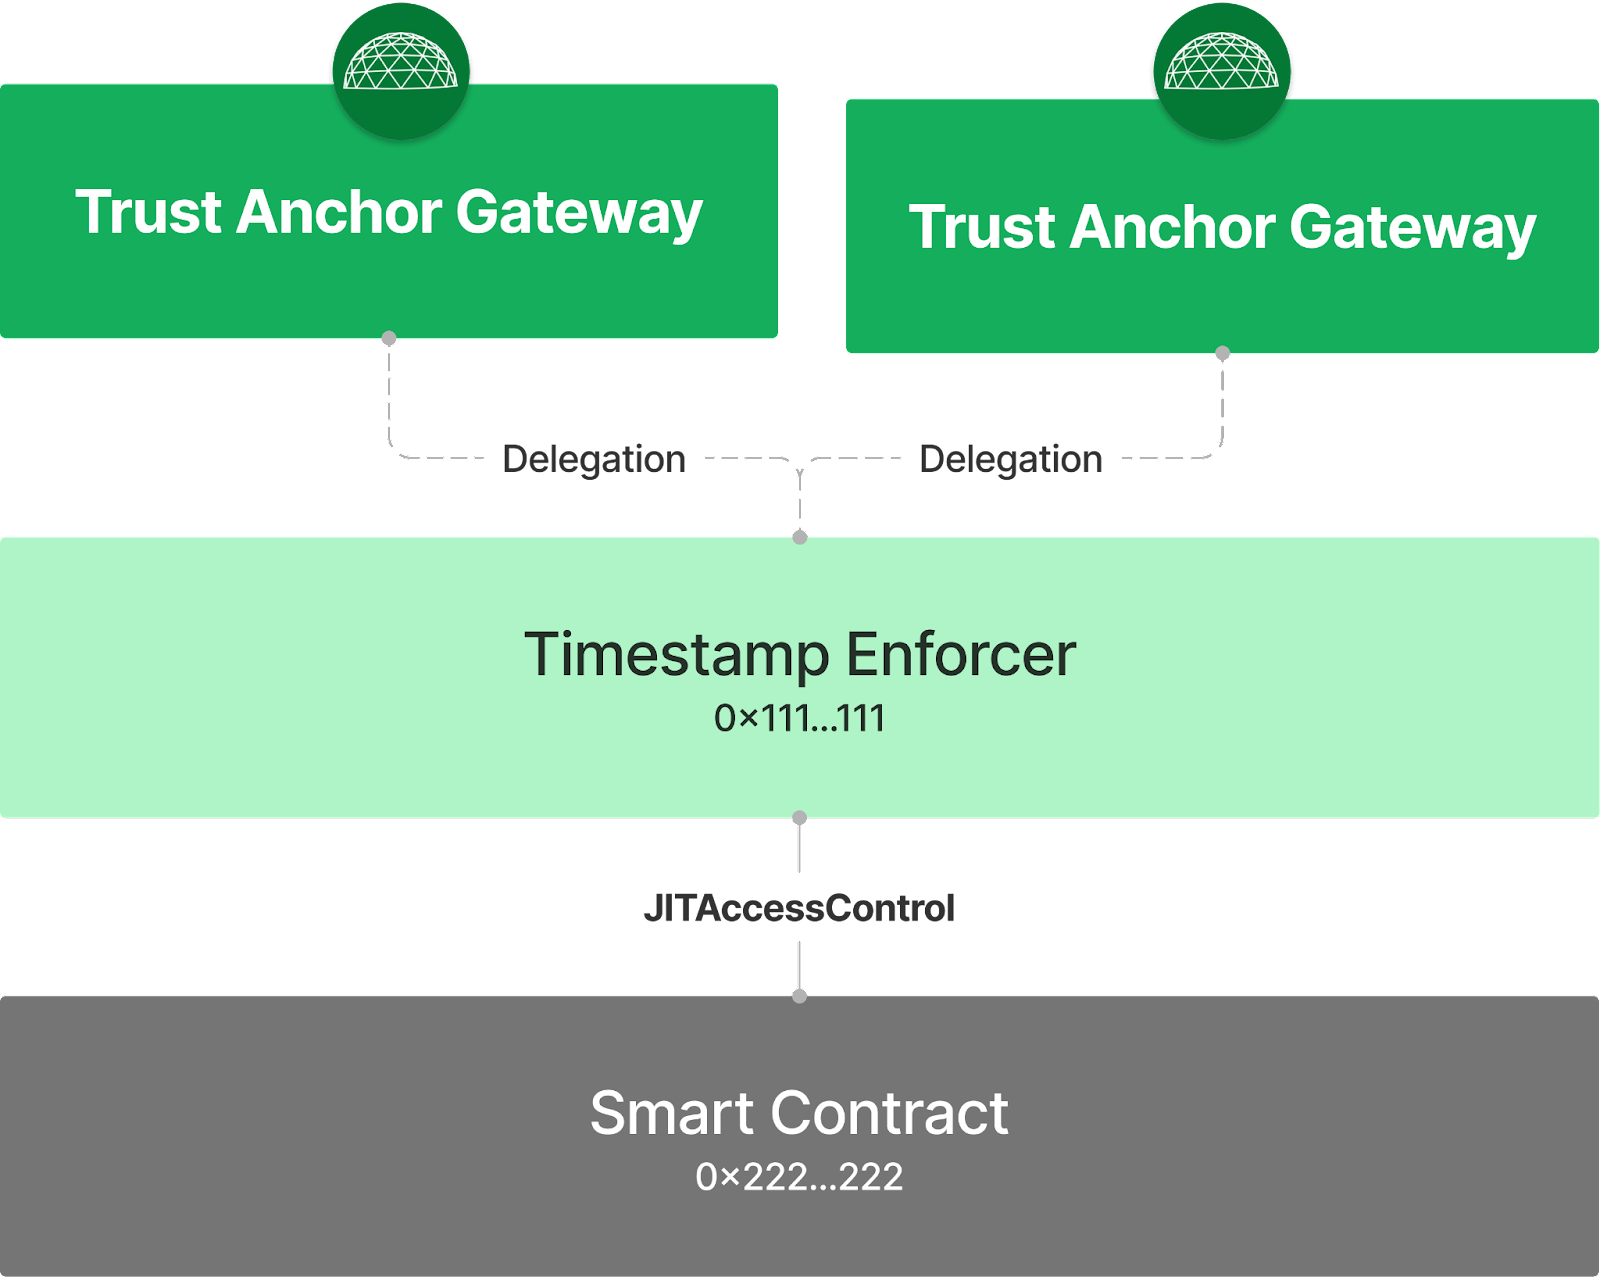 Disclaimer: The V0 technical specification for a Trust Anchor Gateway network is still being finalized, but a prototype is scheduled to launch in Q1 of 2023.